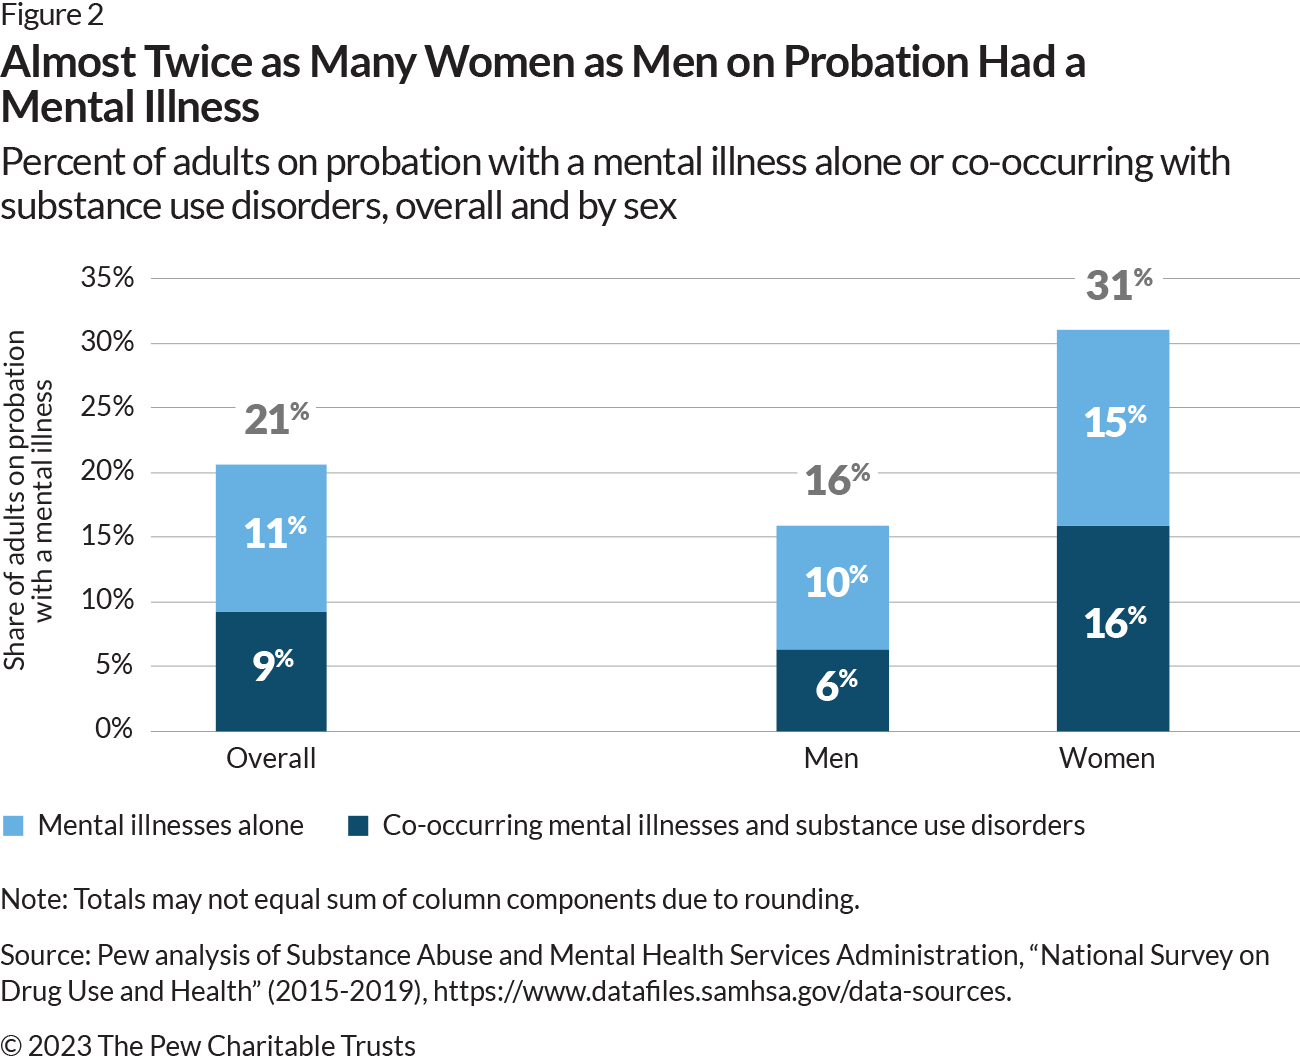 Three-part stacked column chart showing the share of adults on probation with a mental illness overall and broken down by sex. Among all adults on probation, 21% of people had a mental illness alone or co-occurring with a substance use disorder. Within this group, 11% had a co-occurring mental illness and substance use disorder, and 9% had a mental illness. Among men on probation, 16% had a mental illness, with 6% having a mental illness alone and 10% having a co-occurring substance use disorder. Among women on probation, 31% had a mental illness, with 16% having a mental illness alone and 15% having a co-occurring substance use disorder. For each bar, the share of those with a mental illness alone is represented in blue, and the share of those with a co-occurring mental illness and substance use disorder is represented in orange.